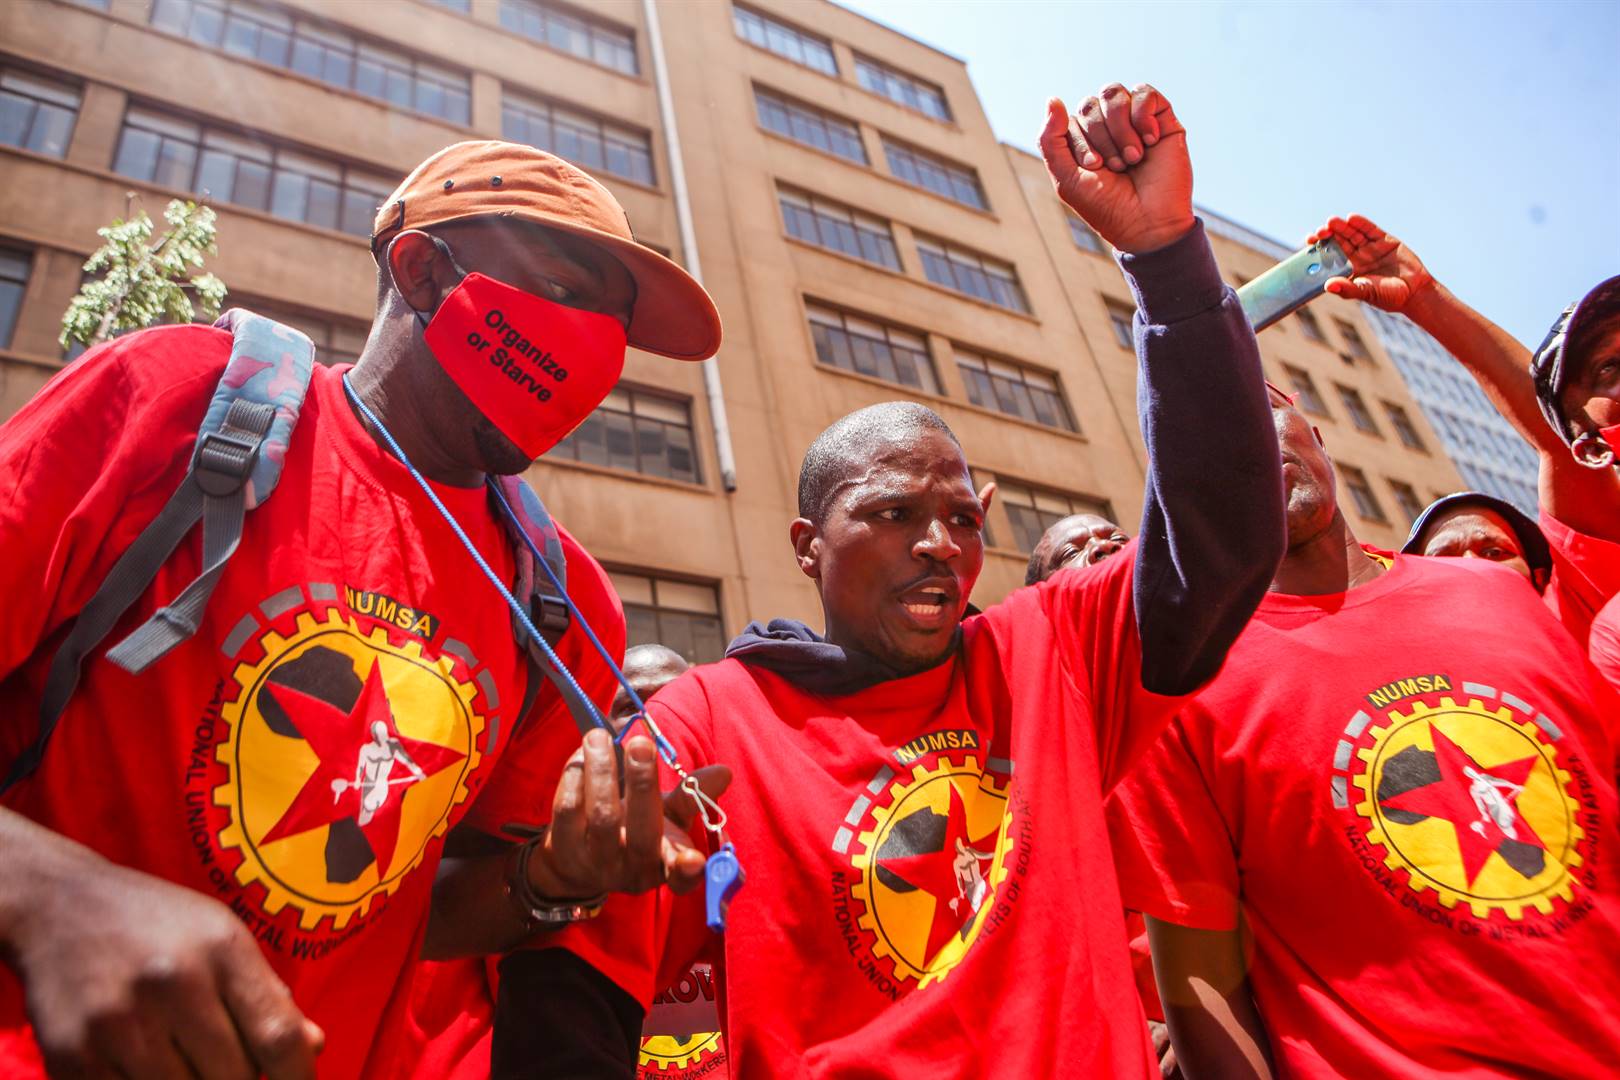 NUMSA supporters protest